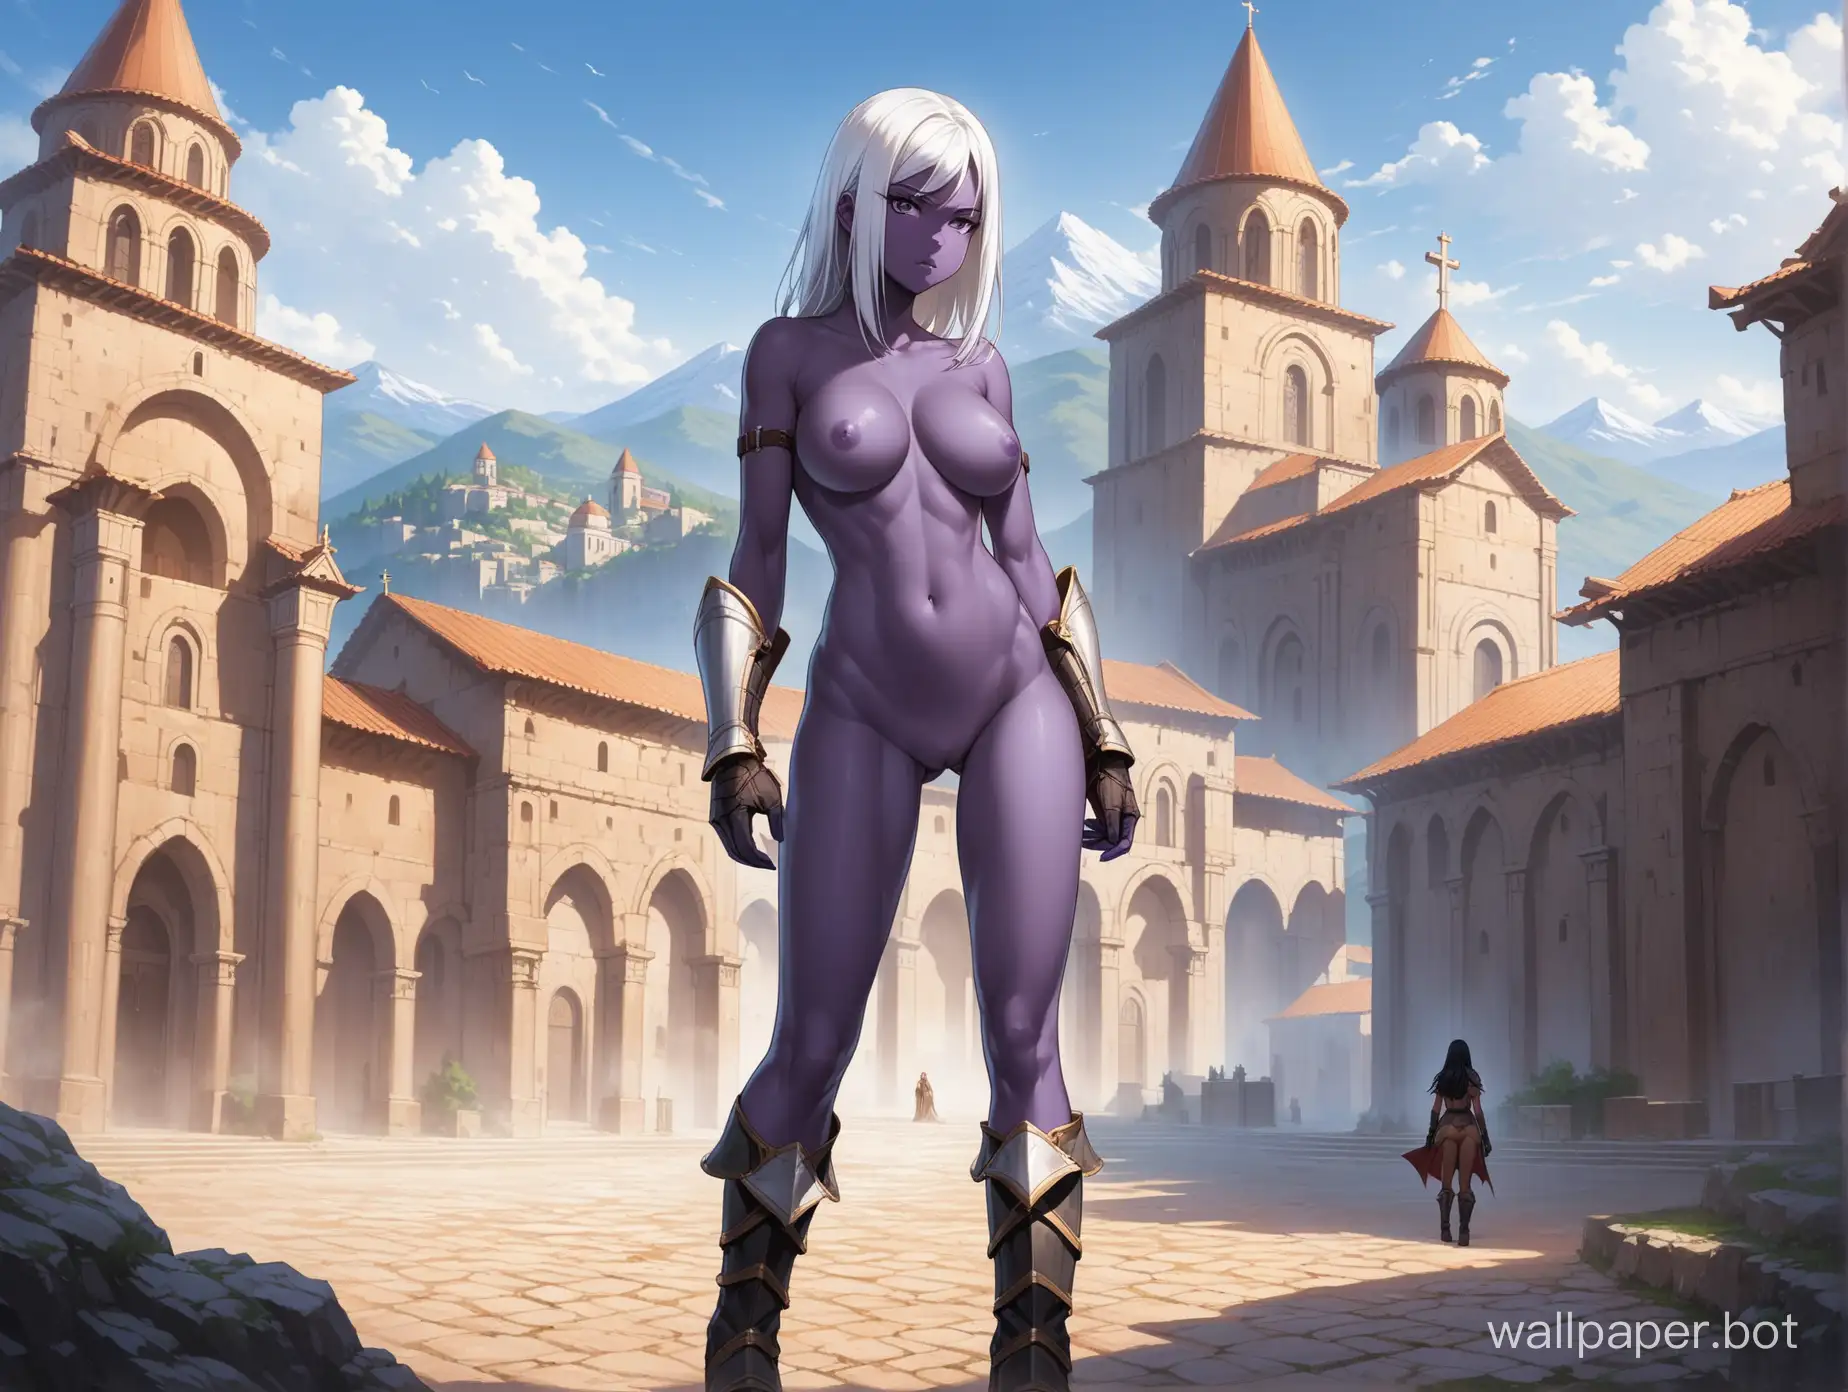 Woman, One, 18 Years old, European, Fit, Purple skin, Oiled skin, Big breasts, Serious face, Makeup, White hair, Medium hair, Straight hair, Armor gloves, Armor, Full body, Dynamic angle, Standing, Ancient city, Church, Mountains, Dark purple skin, Boots, Corset, Topless, nude, no pants